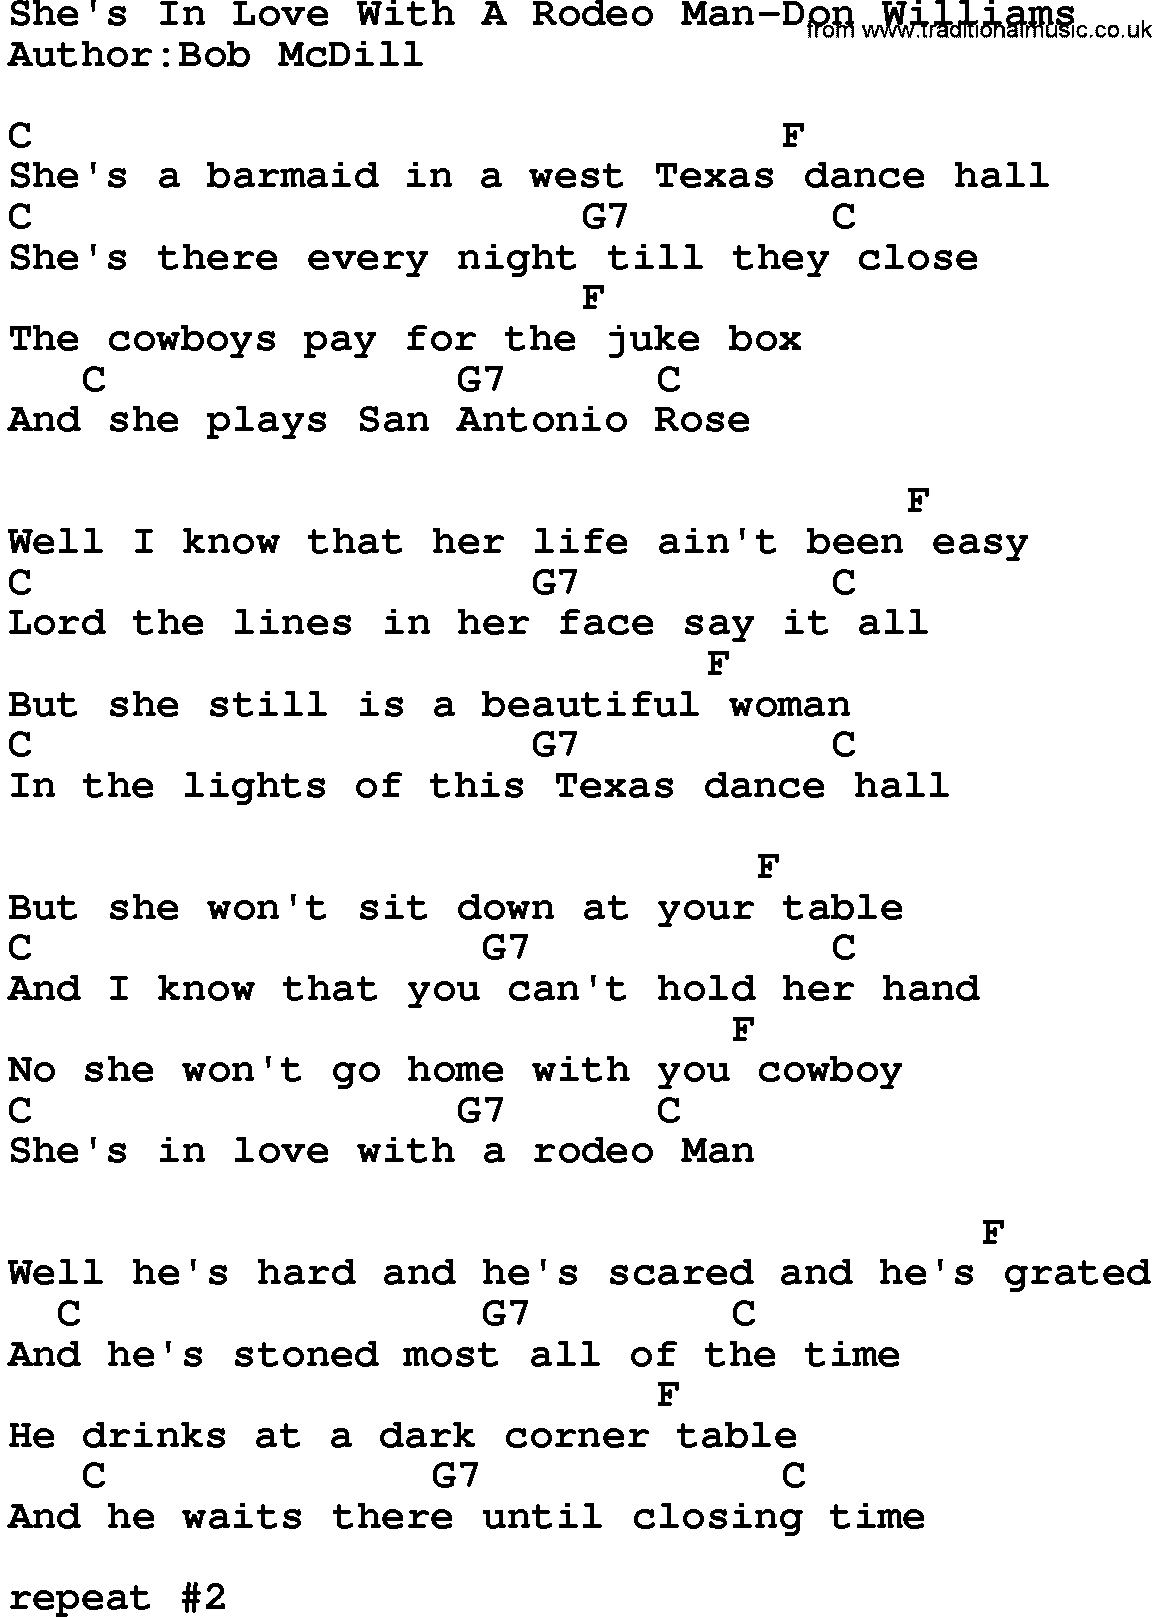 Country music song: She's In Love With A Rodeo Man-Don Williams  lyrics and chords